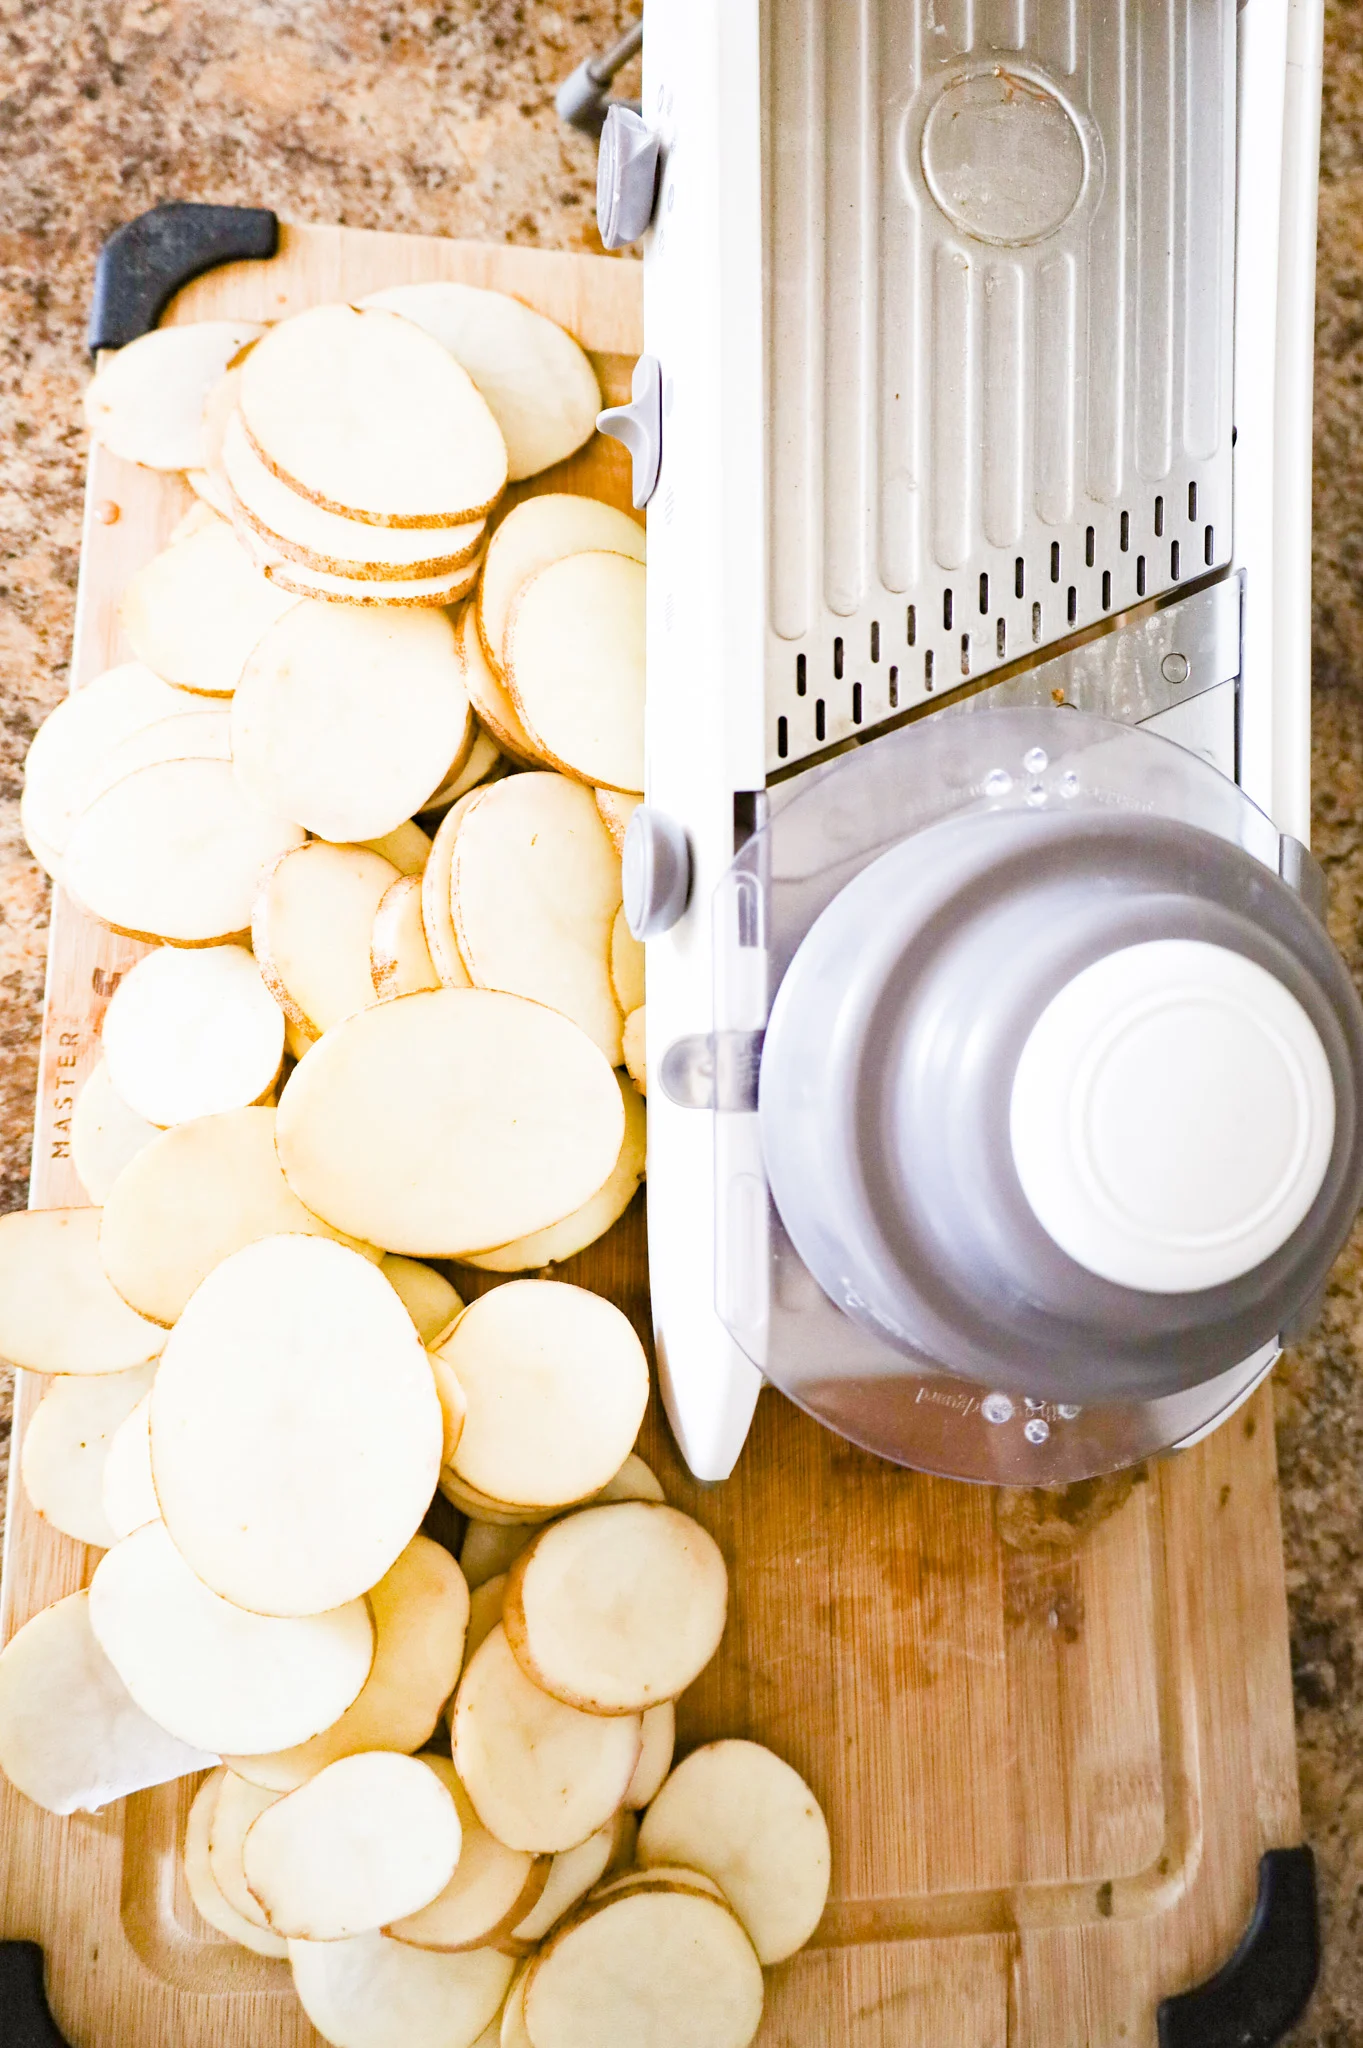 sliced potatoes on a cutting board with a mandoline slicer